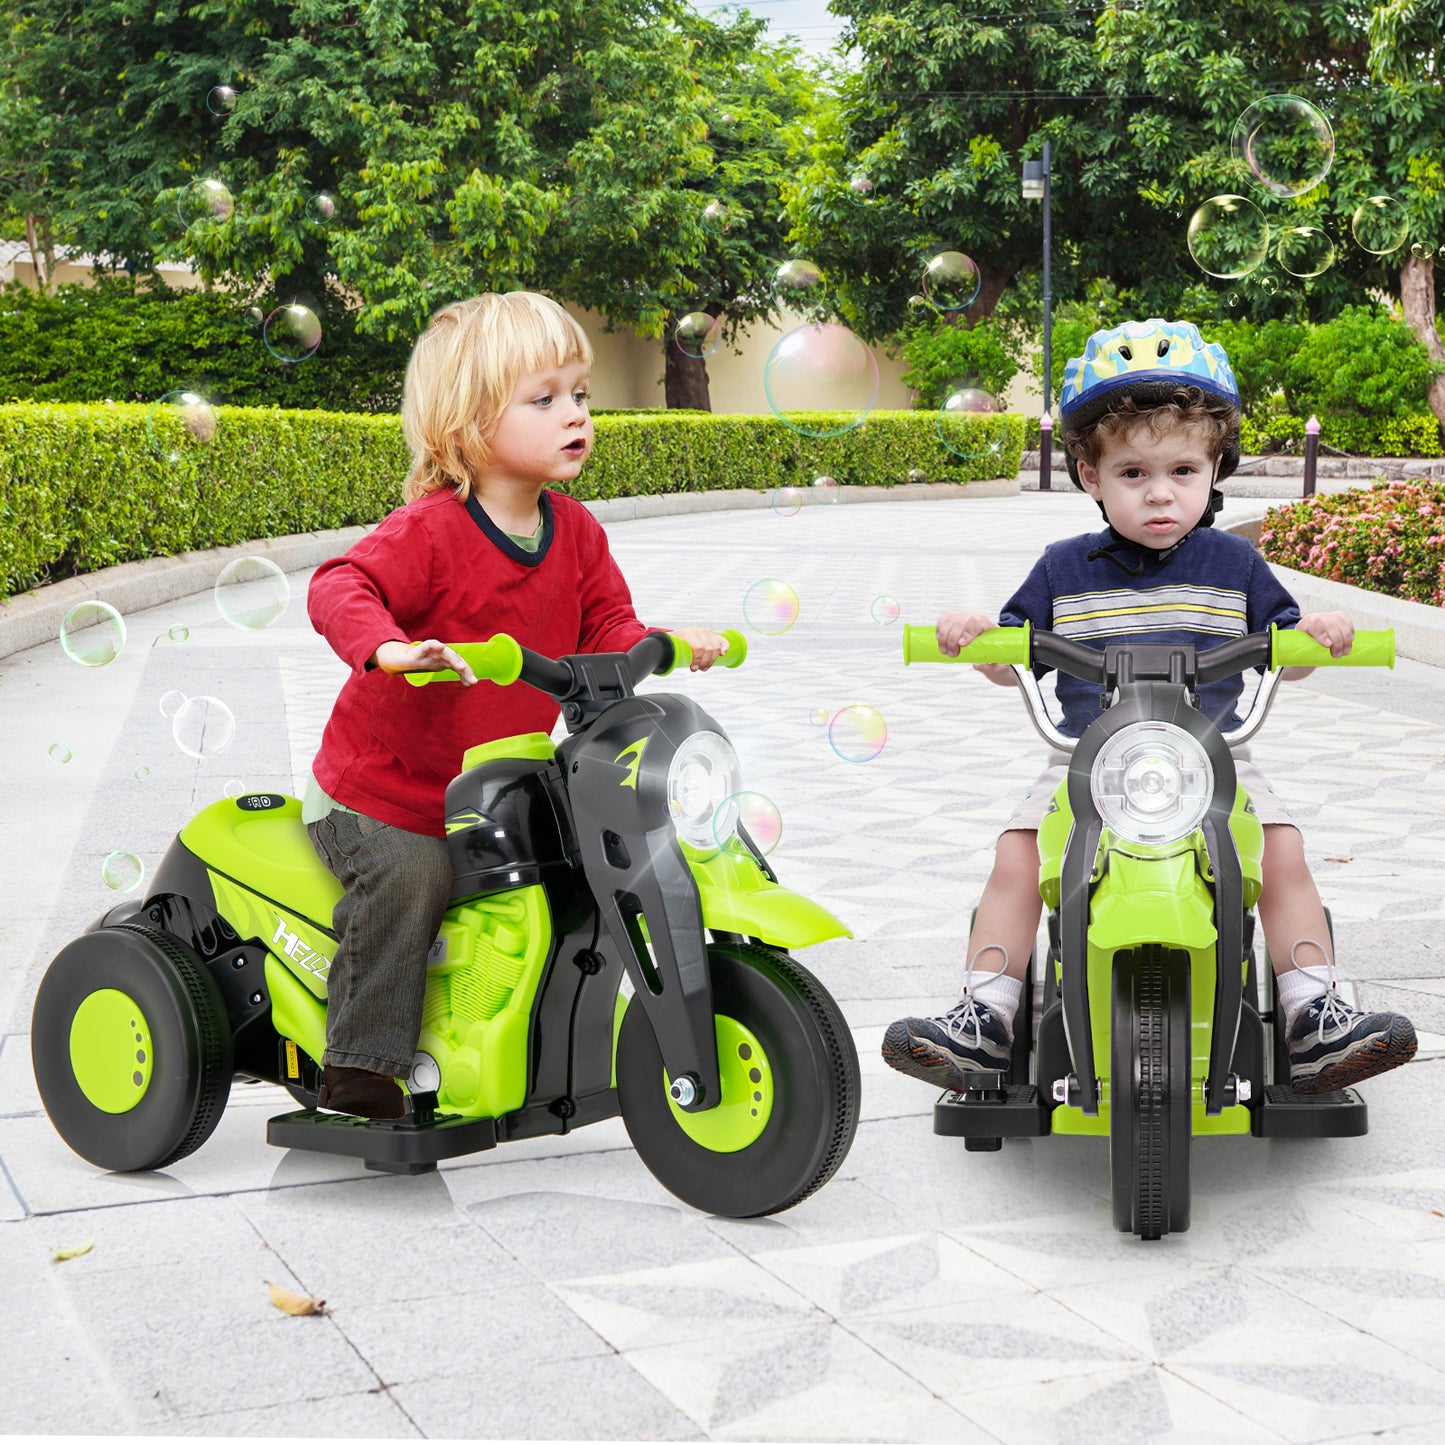 OLAKIDS Kids Motorcycle, 6V Electric Ride On Car with Automatic Bubble Function, Foot Pedal, Headlight, Music, 3 Anti-Skip Wheels Vehicle for Children, Toddler Ages 3+